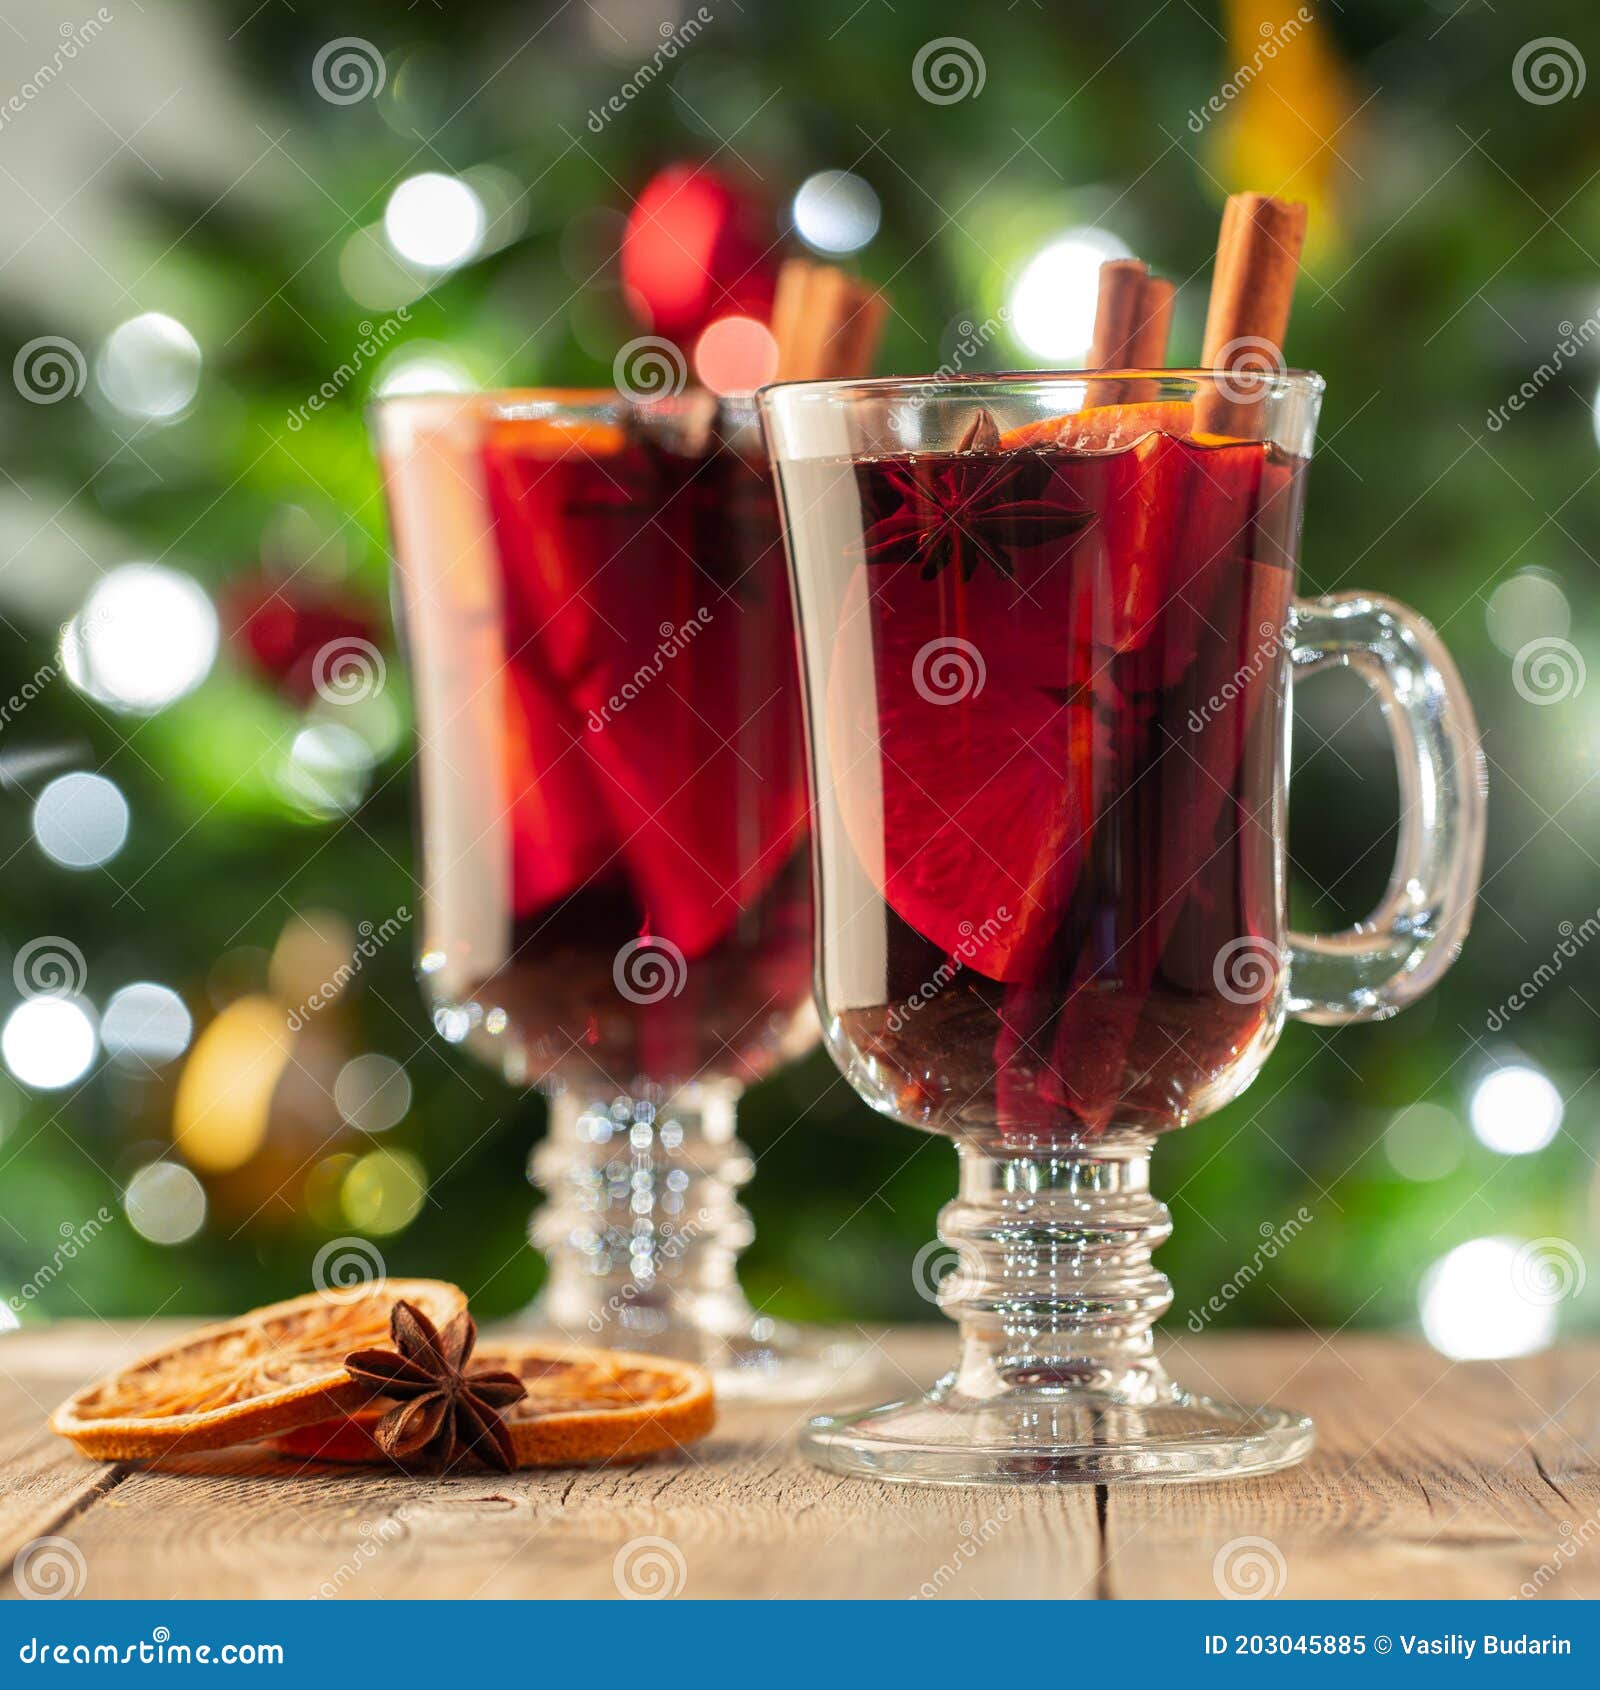 Two Glass of Christmas Mulled Wine or Gluhwein with Spices and Orange ...